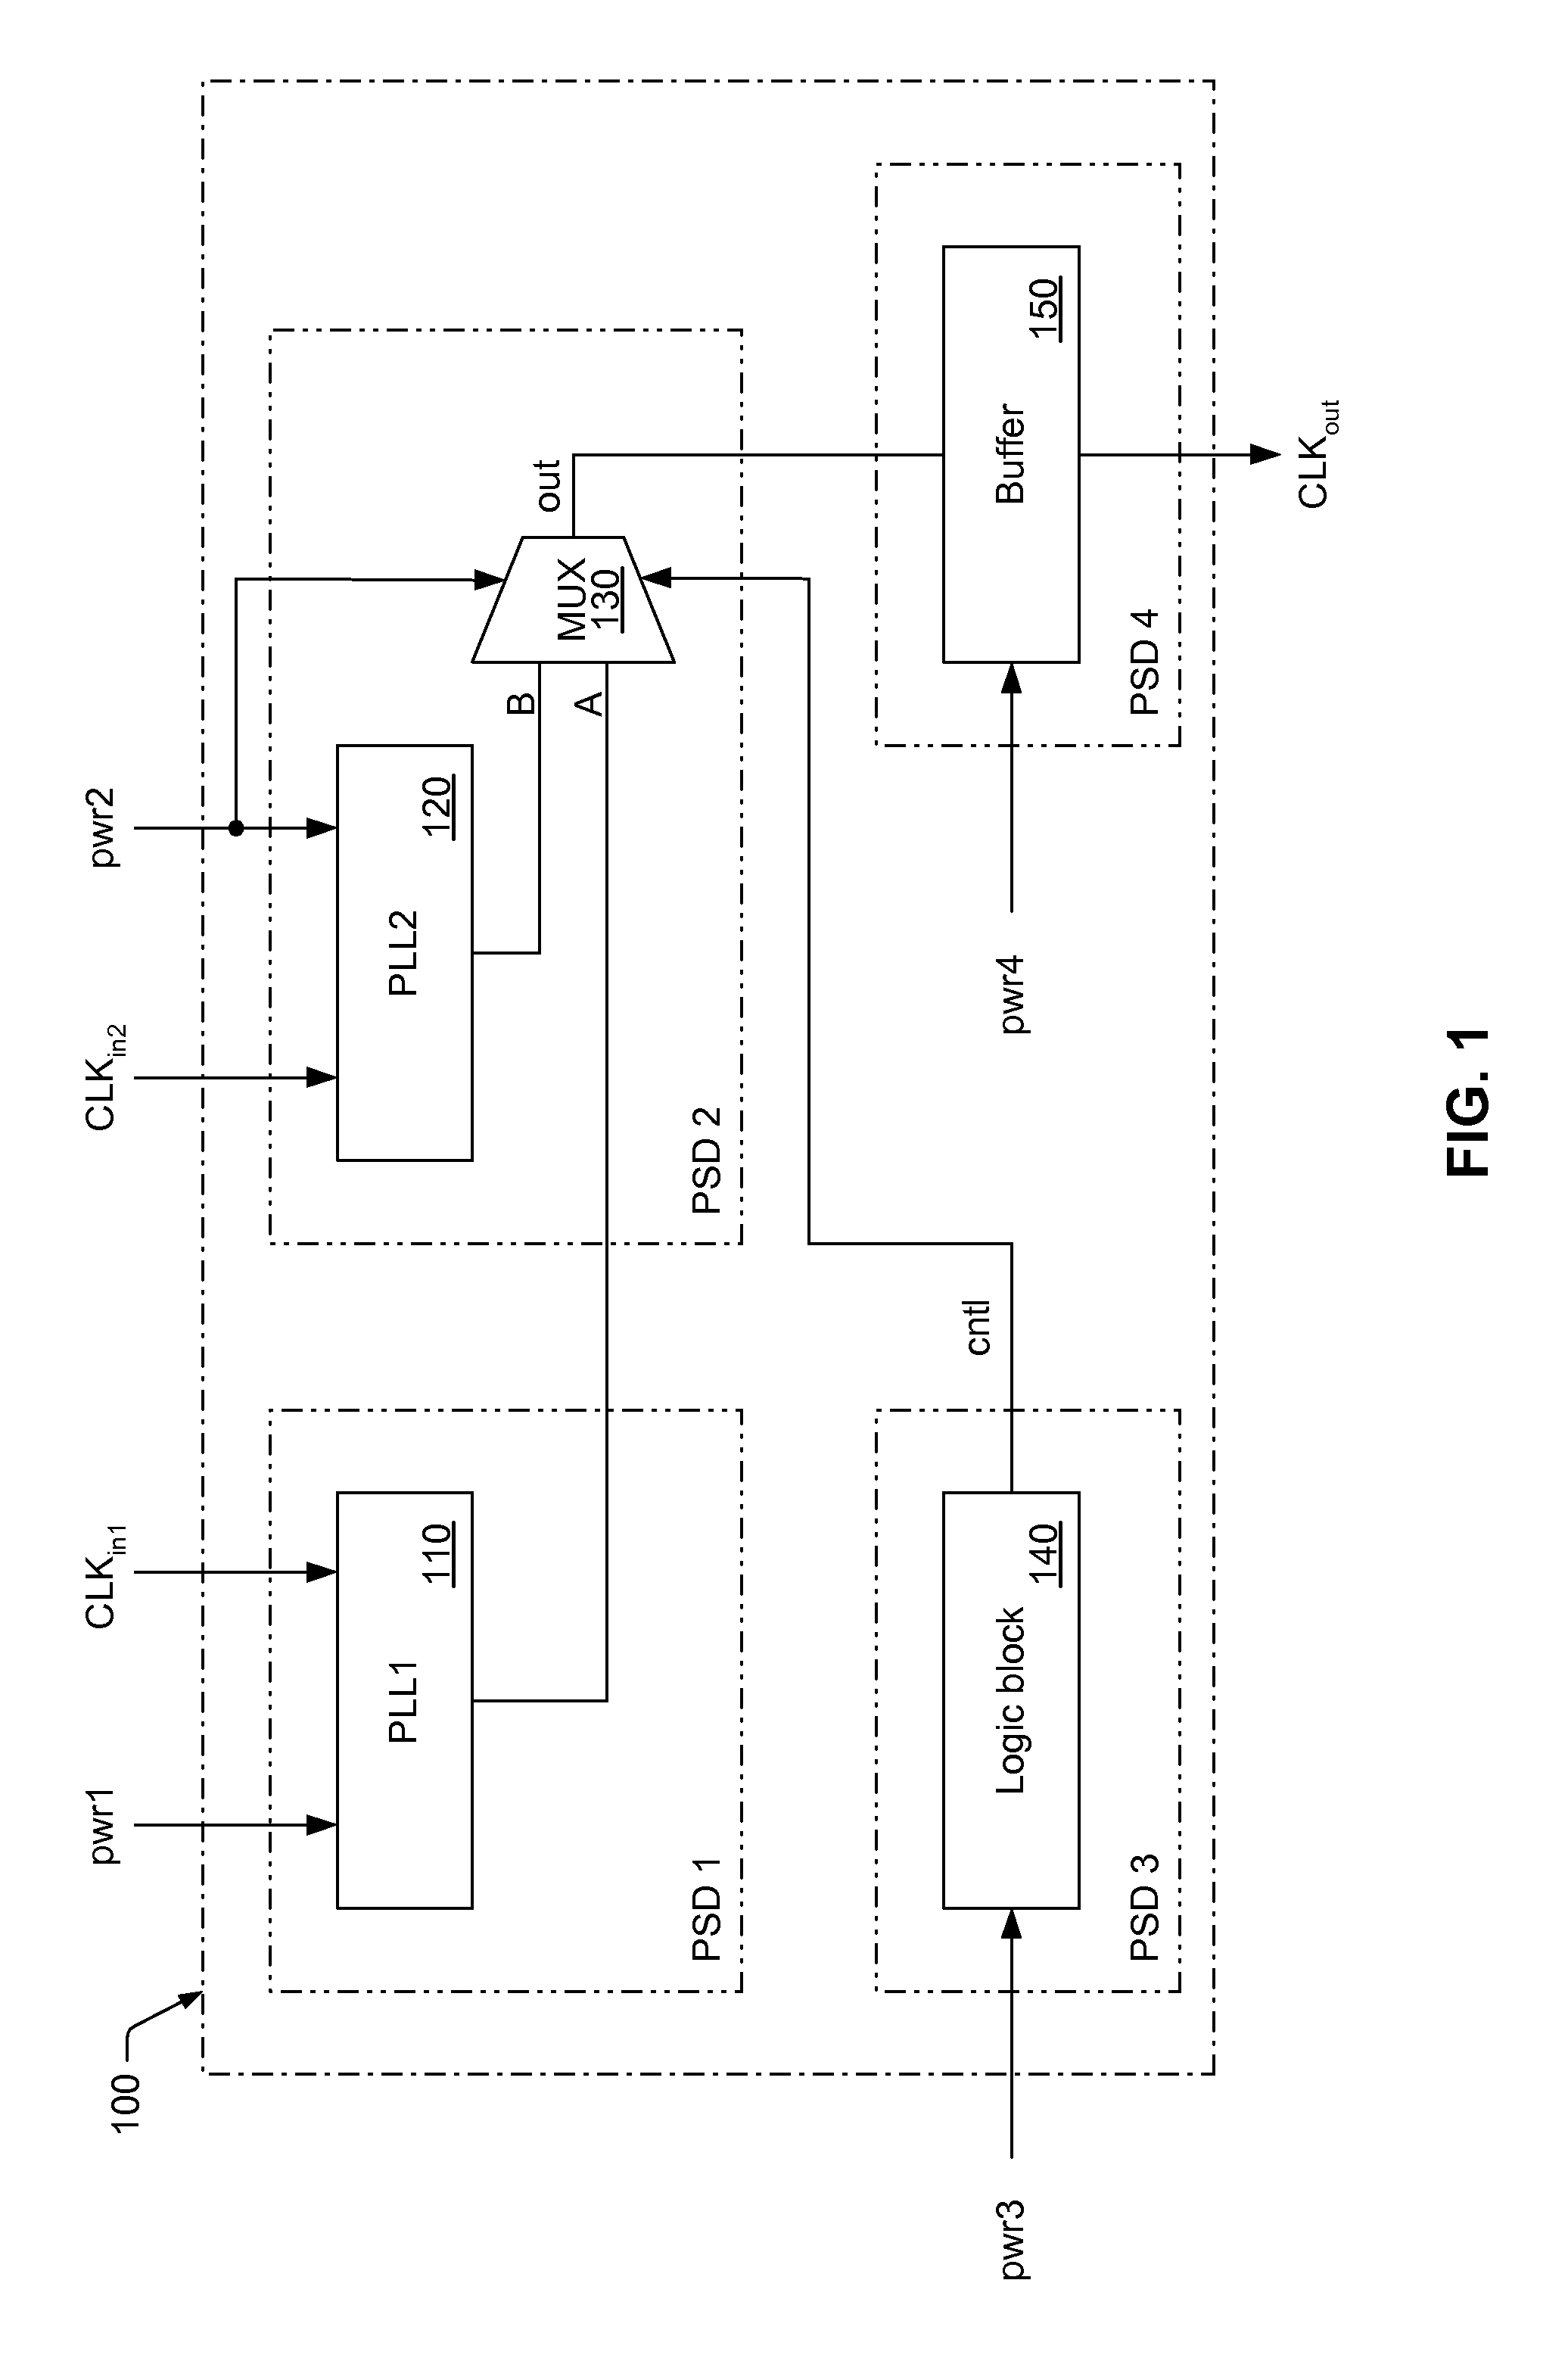 Circuit, system, and method for multiplexing signals with reduced jitter